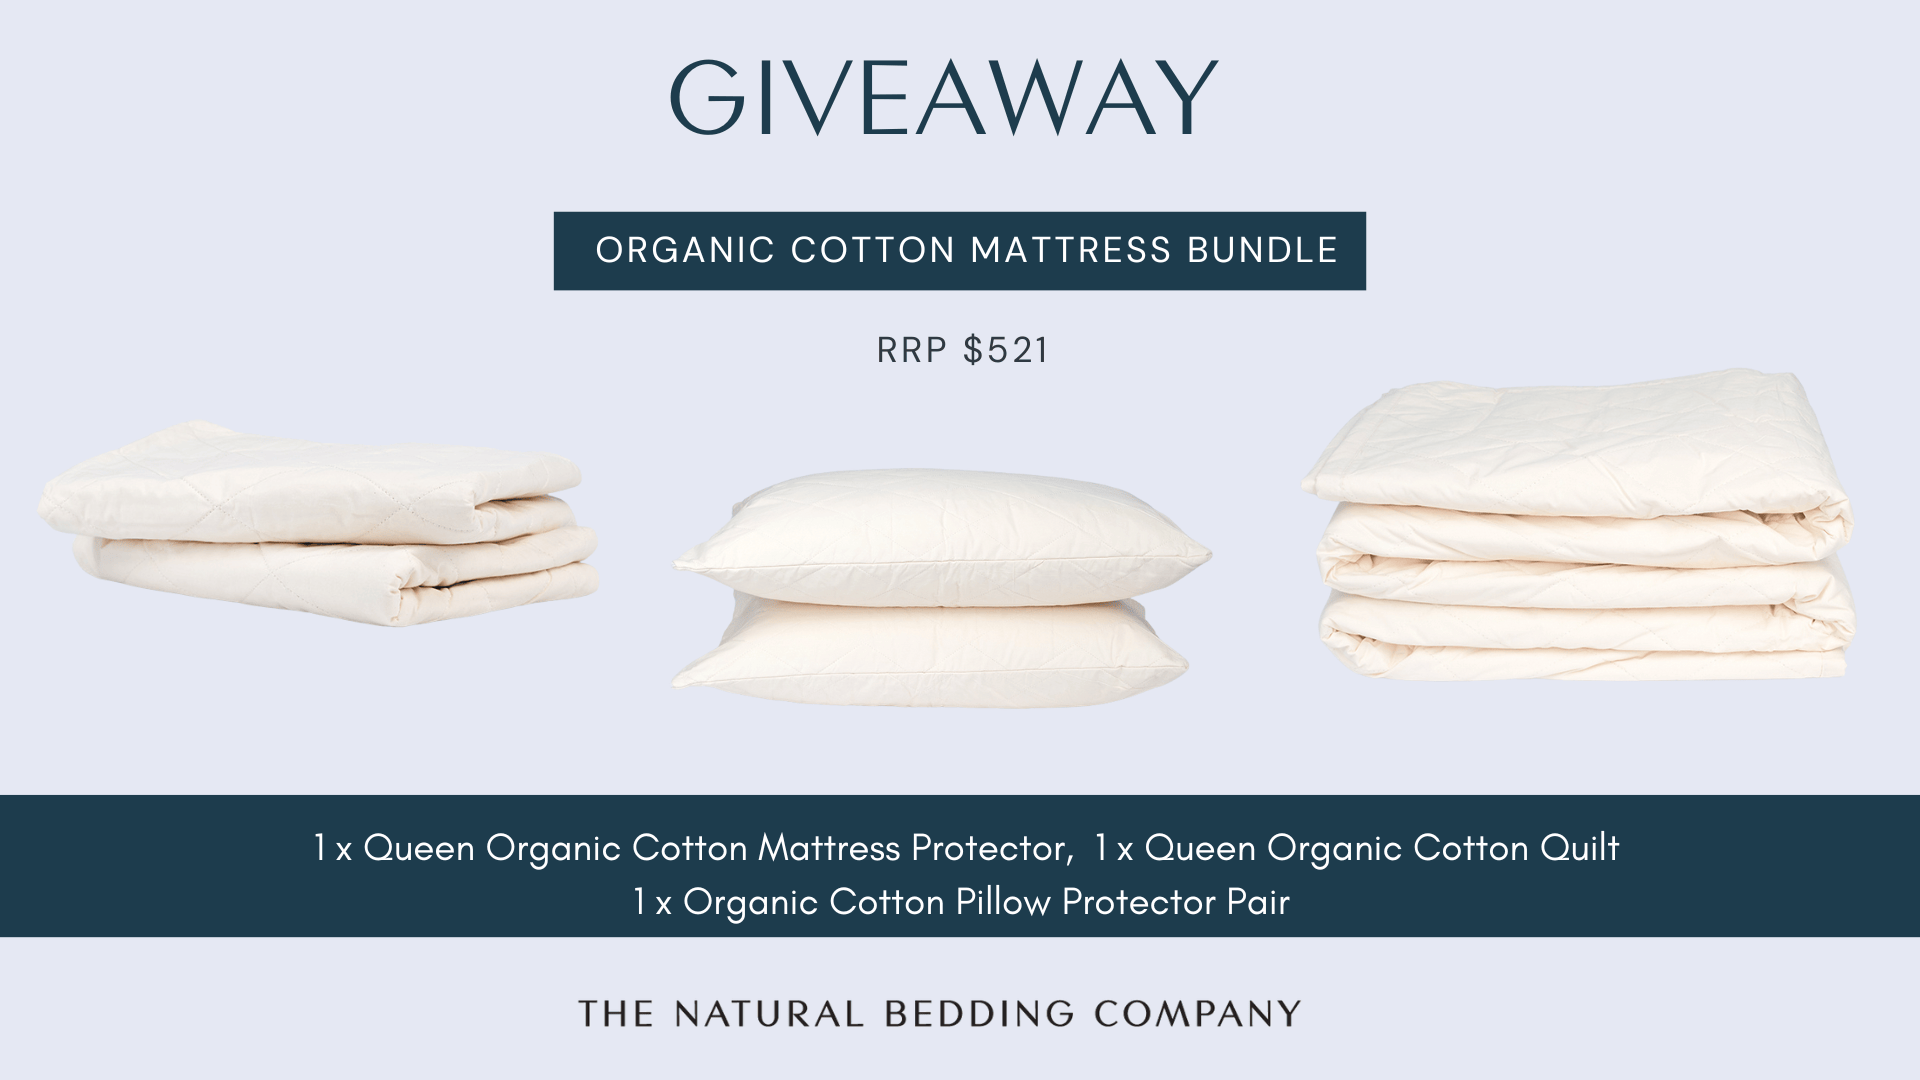 WIN a $521 Organic Cotton Mattress Bundle from The Natural Bedding Company